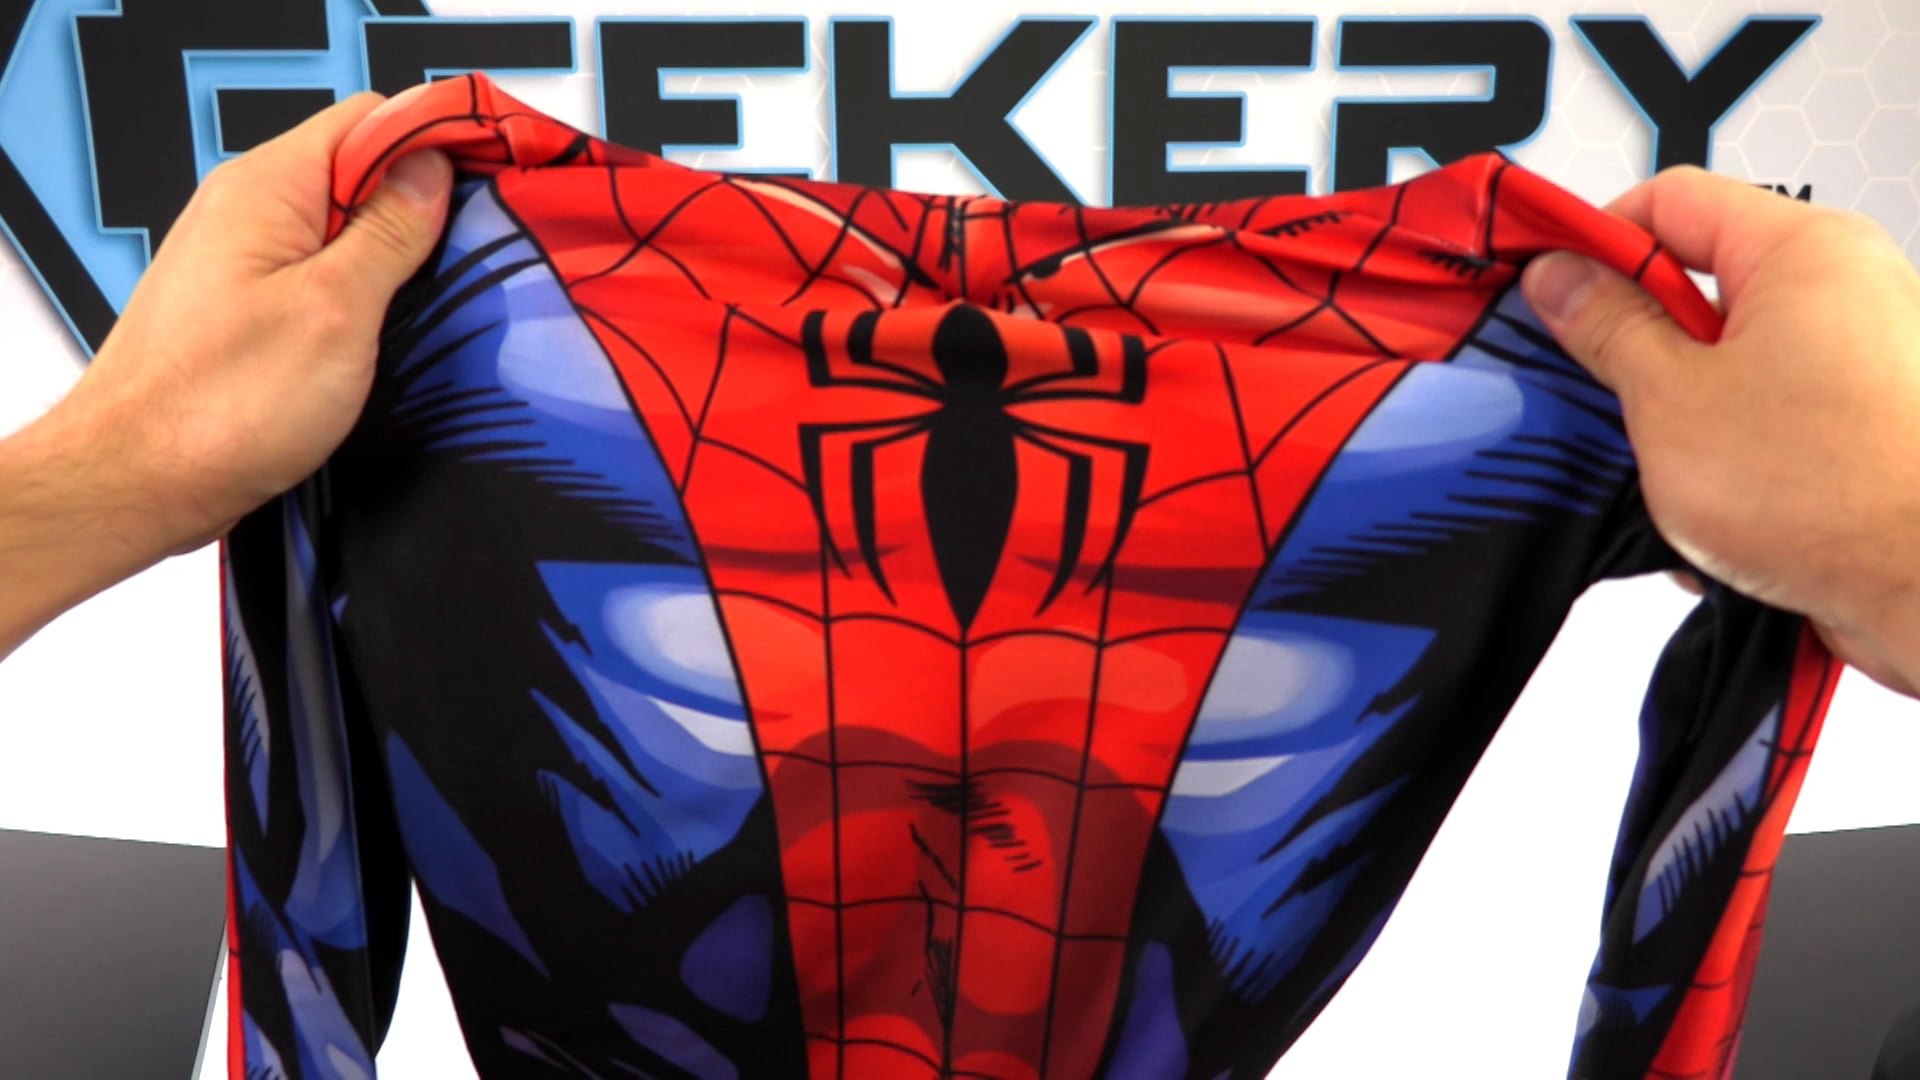 The Geekery View - Bagley Spider-Man Suit - COMMERCIAL